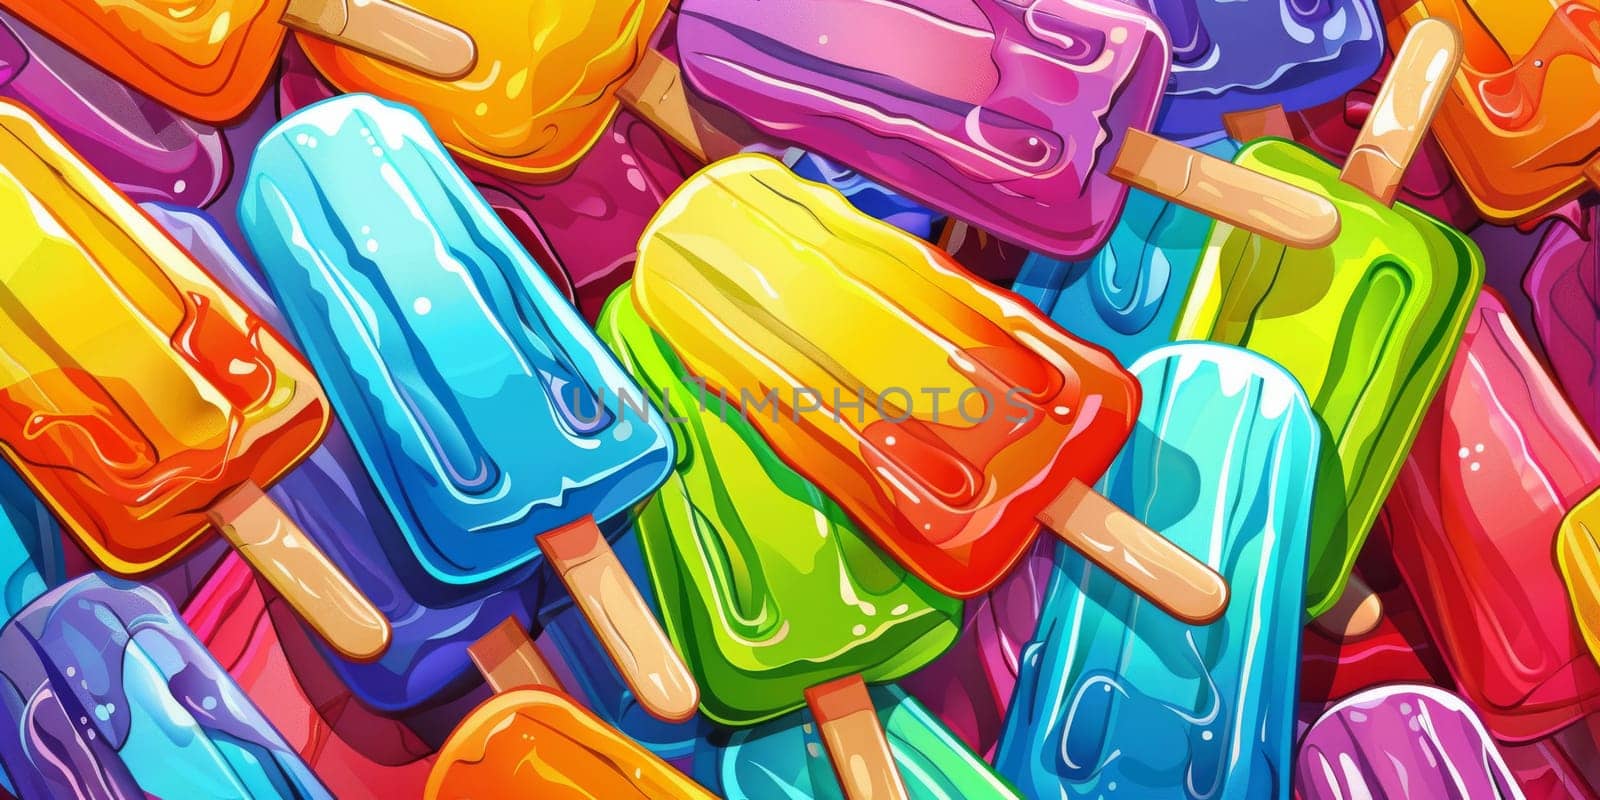 Colorful ice, fruity lolly as background or texture, food concept by Kadula